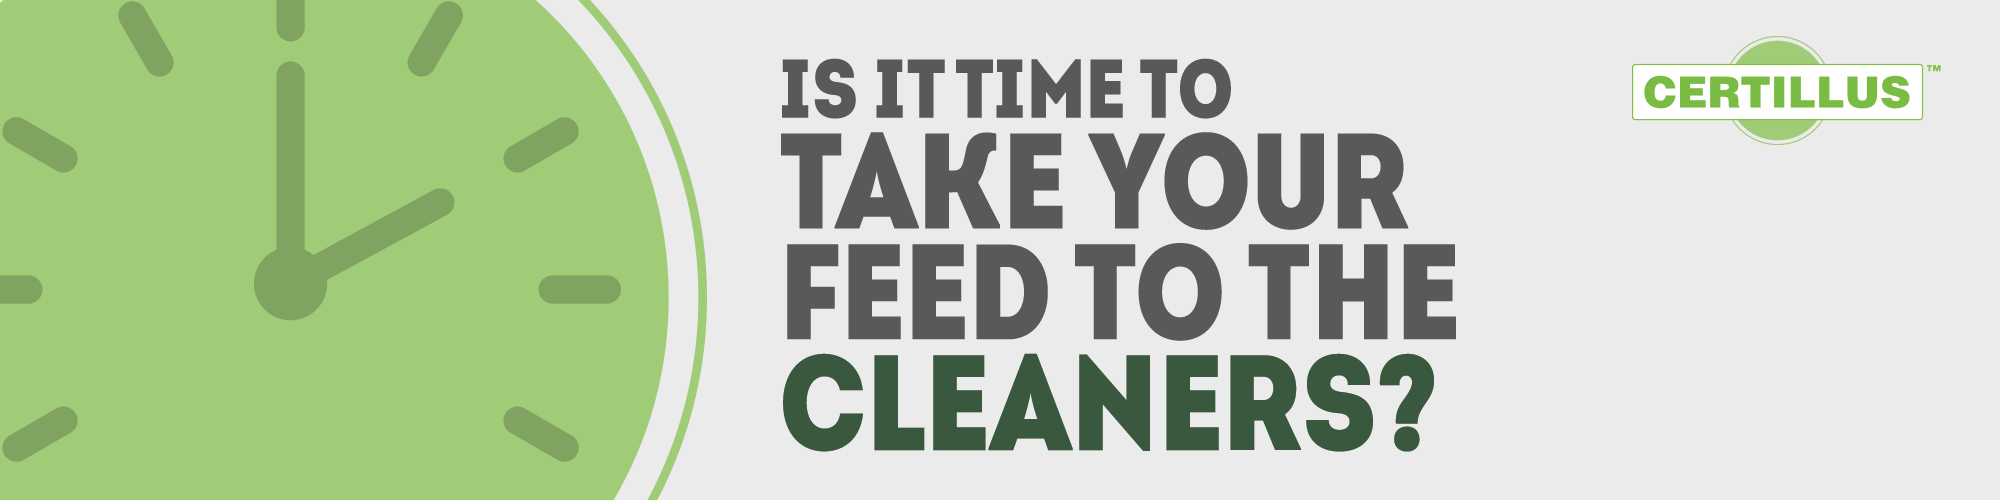 Is it time to take your feed to the cleaners? CERTILLUS